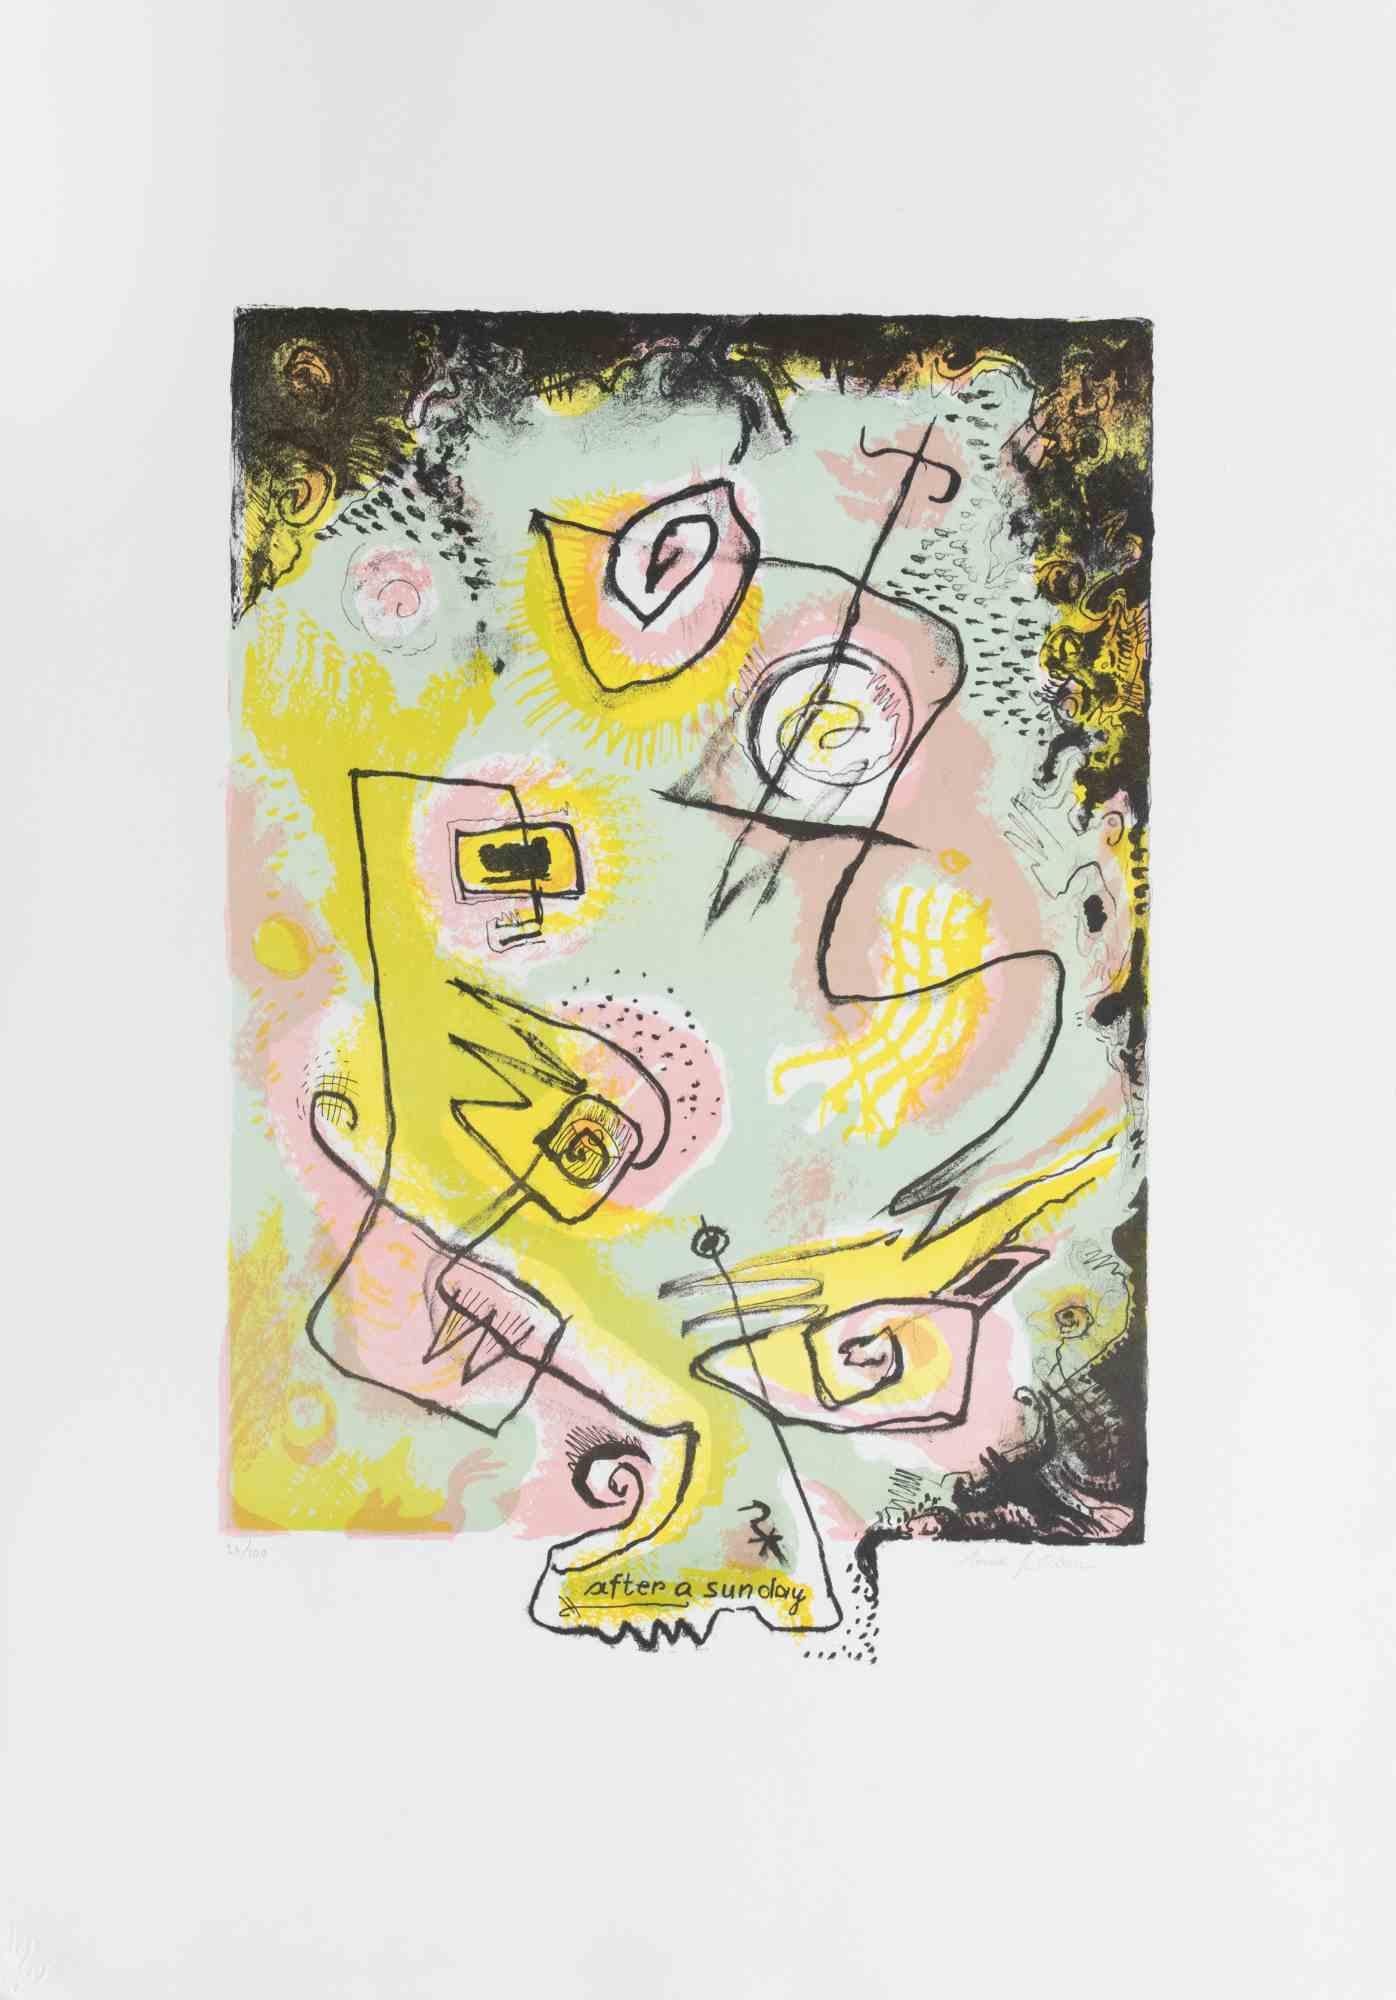 After a sunday is a contemporary artwork realized by Le Oben in 1970s.

Mixed colored lithograph.

Hand signed on the lower margin.

Numbered on the lower margin.

Edition of 23/100. 